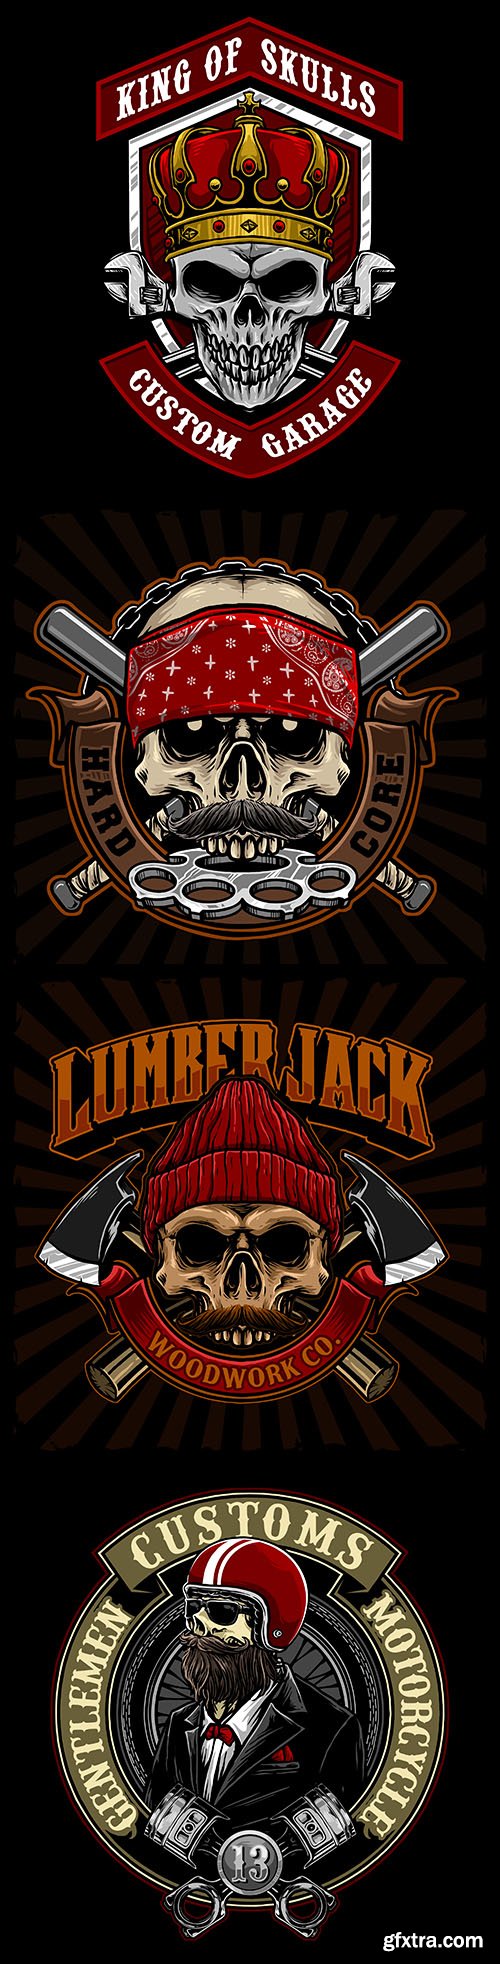 Skull and retro biker style weapons design emblems